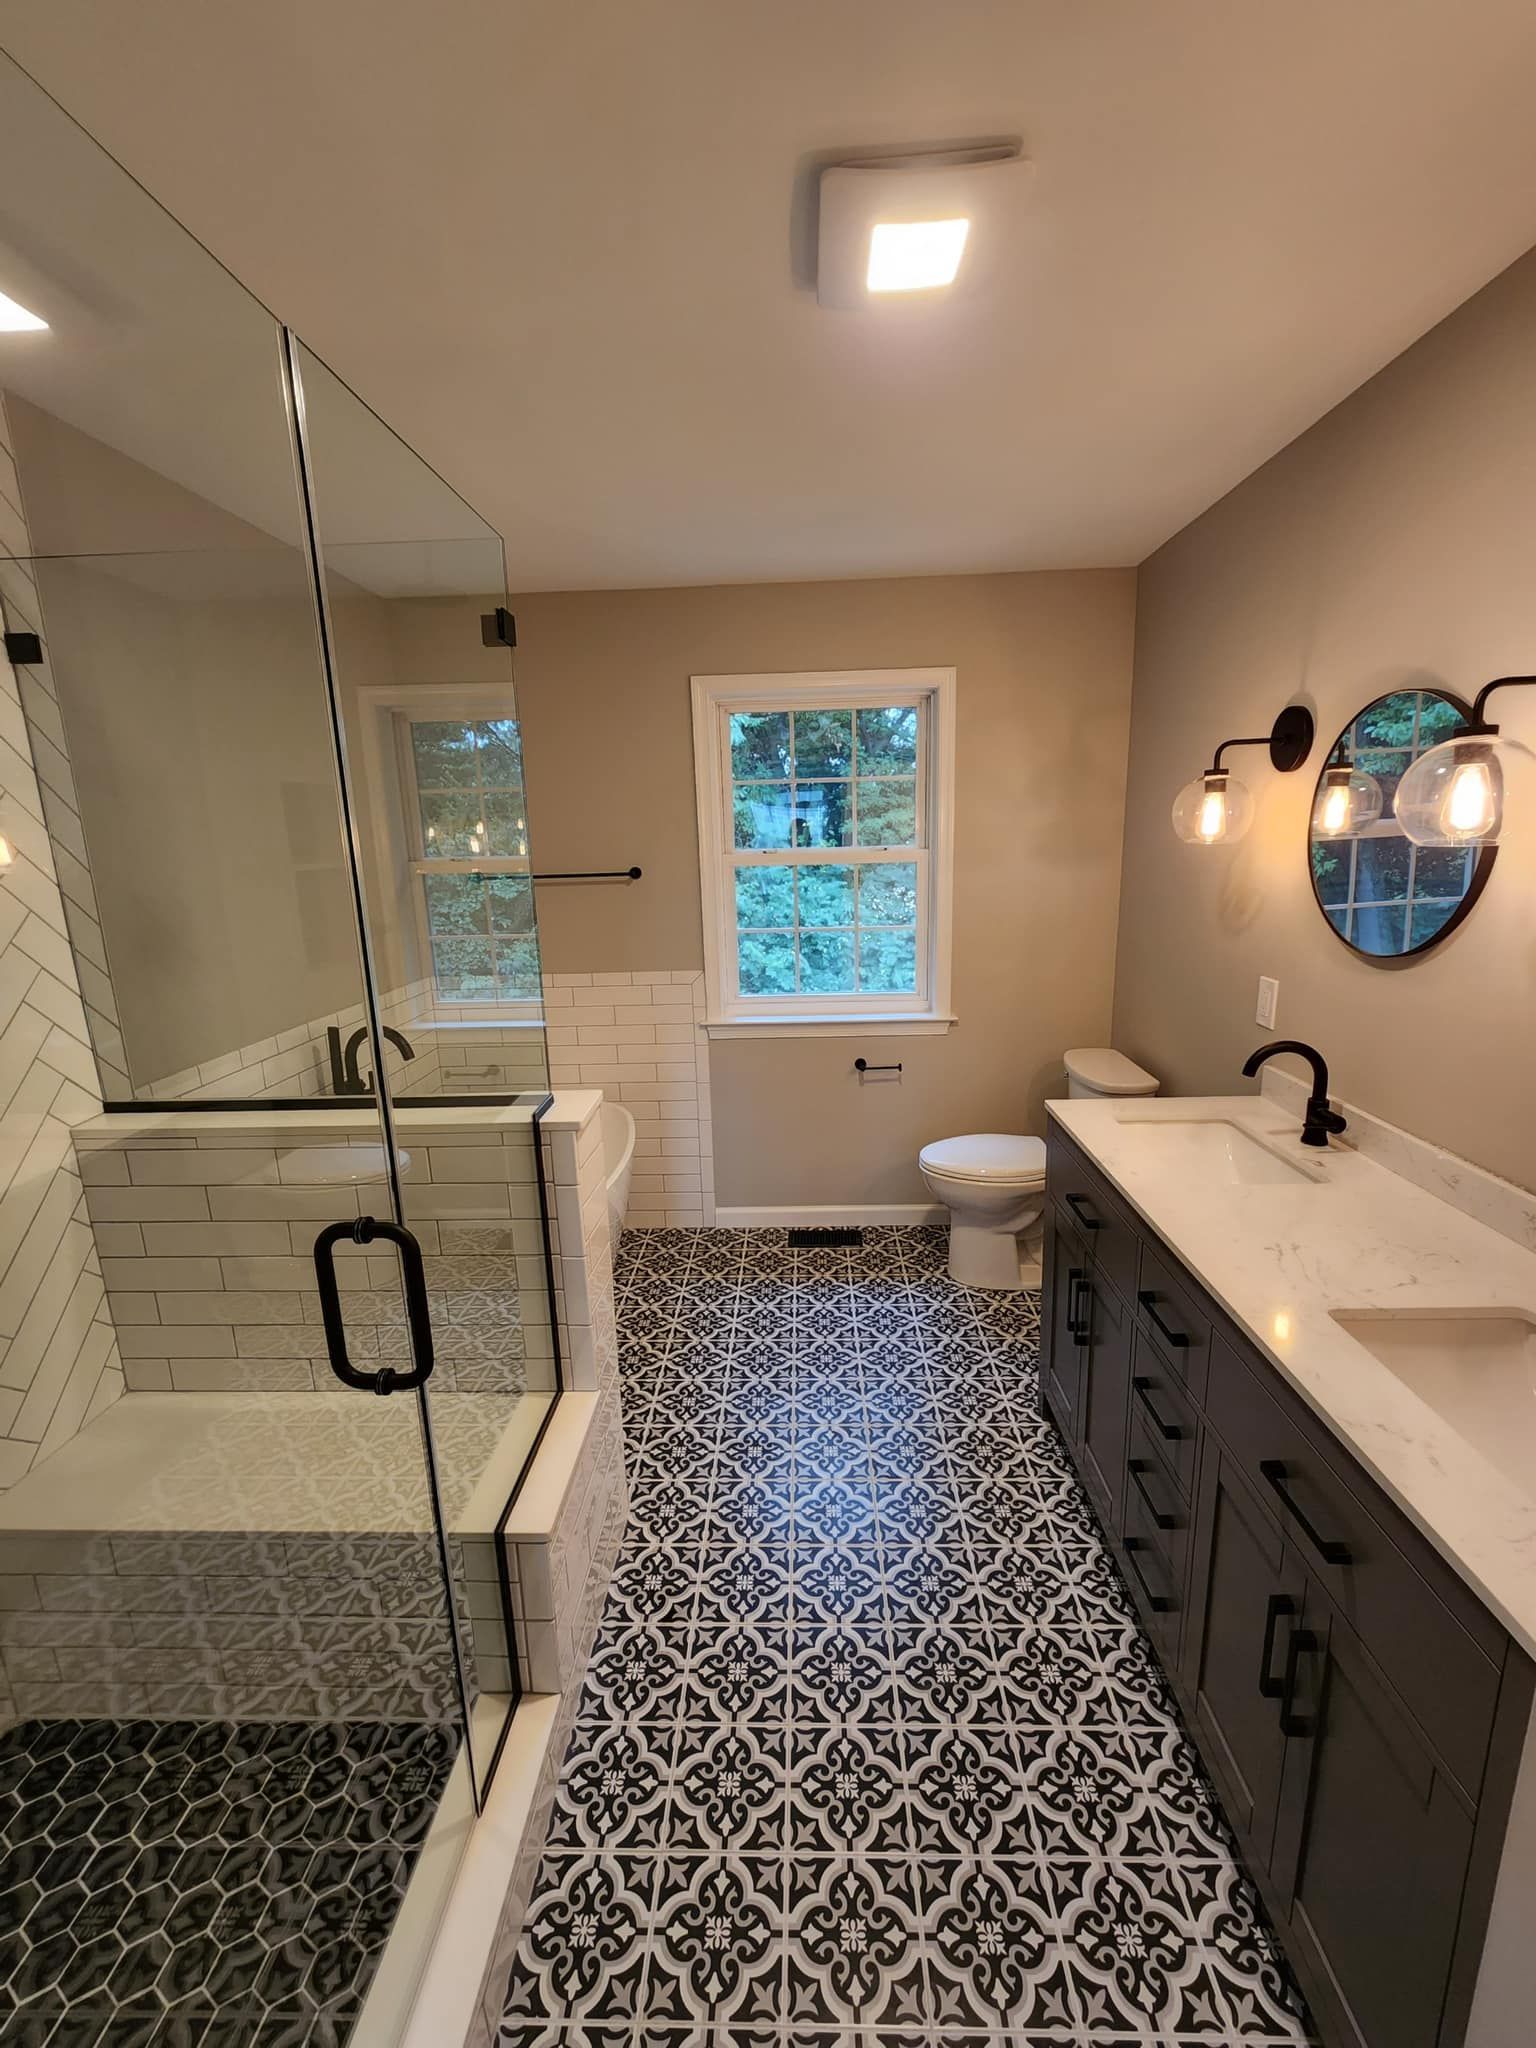 Modern bathroom with updated fixtures and elegant design by MAS Home Improvement in Bethlehem, PA